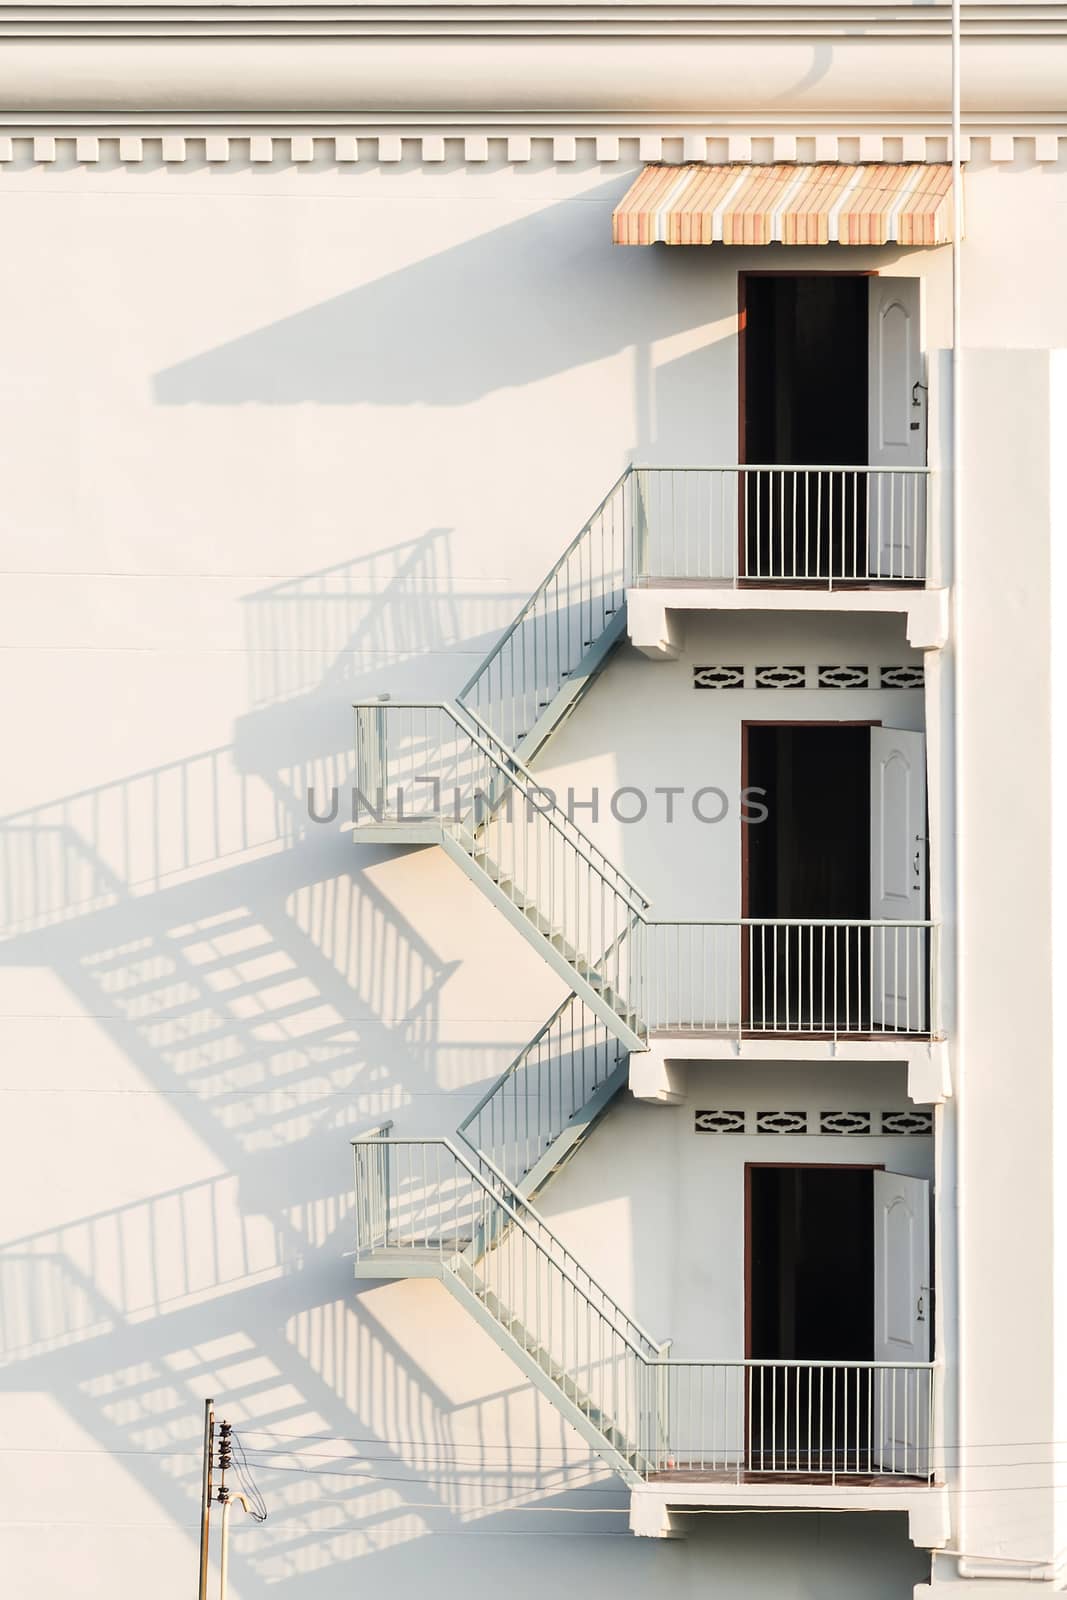 fire escape with afternoon shadows on exterior wall. by koson